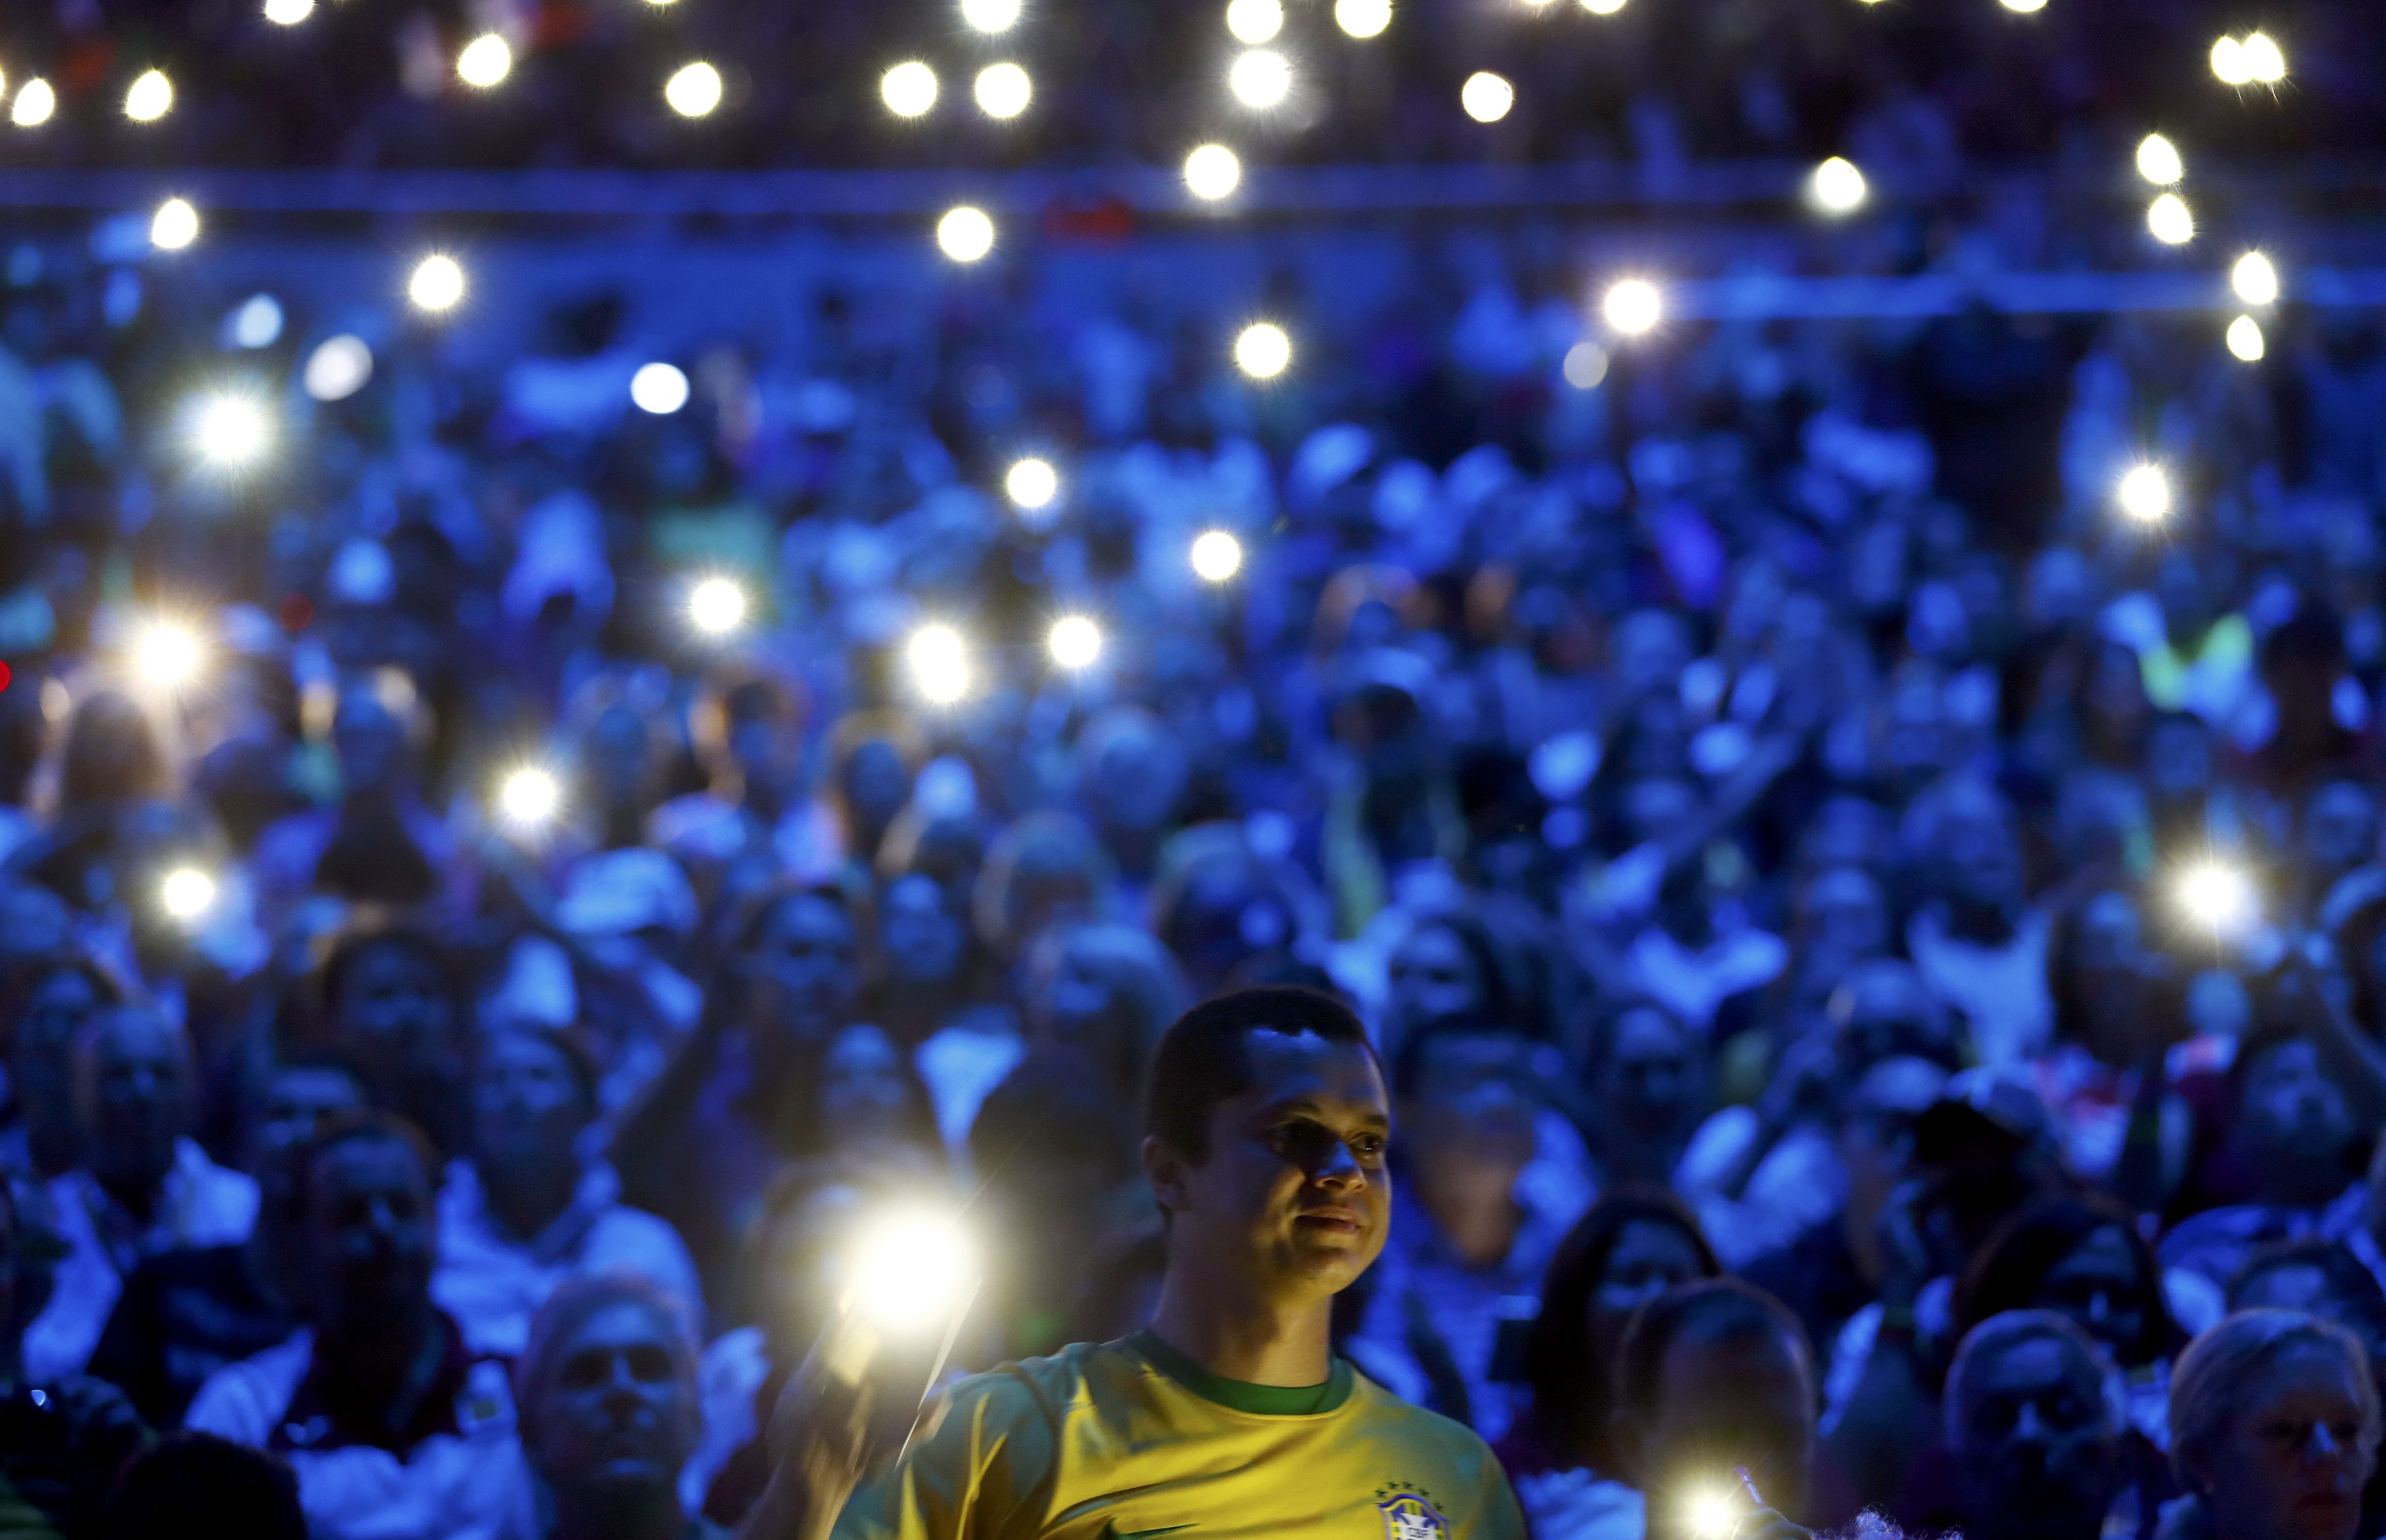 2016 Rio Olympics - Opening Ceremony - Maracana - Rio de Janeiro, Brazil - 05/08/2016. Spectators use their mobile phones for illumination. REUTERS/Kai Pfaffenbach FOR EDITORIAL USE ONLY. NOT FOR SALE FOR MARKETING OR ADVERTISING CAMPAIGNS. TPX IMAGES OF THE DAY